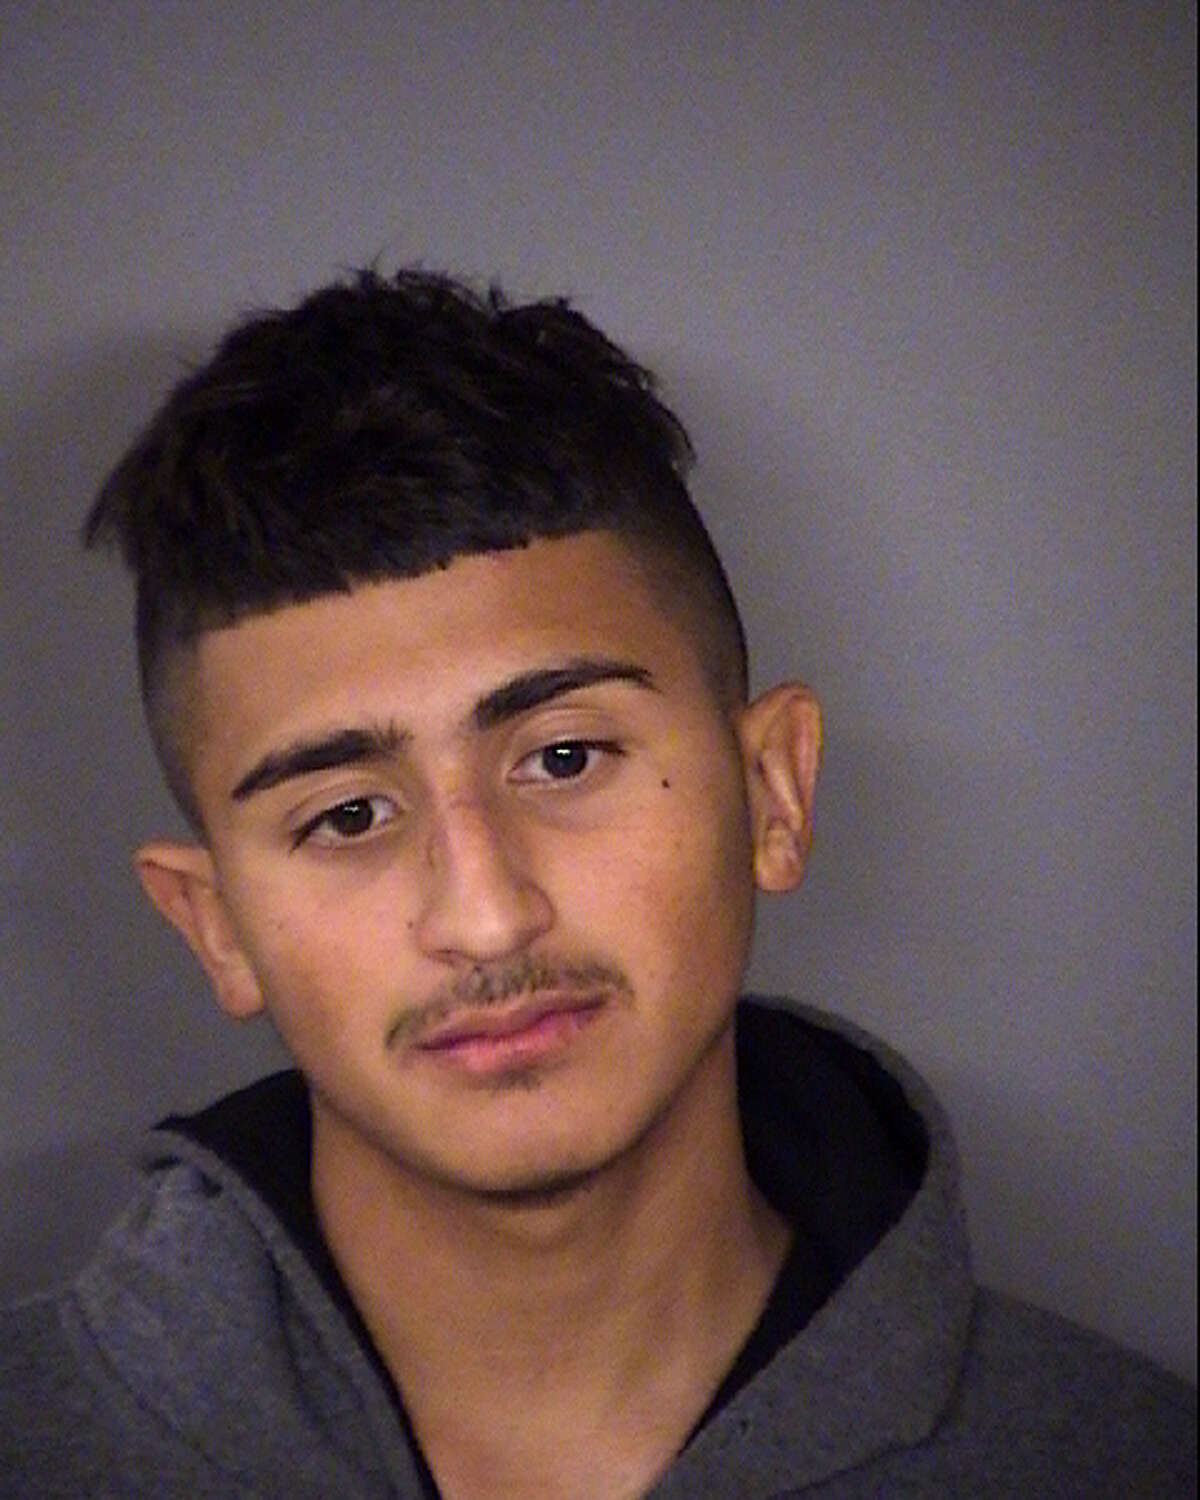 Guadalupe Gil, 18, of San Antonio, was arrested in September 2017 and is accused of impregnating a teenage girl after he allegedly violated a protective order six times in three months. Police said Gil sent the girl's father a video of the couple having sex.